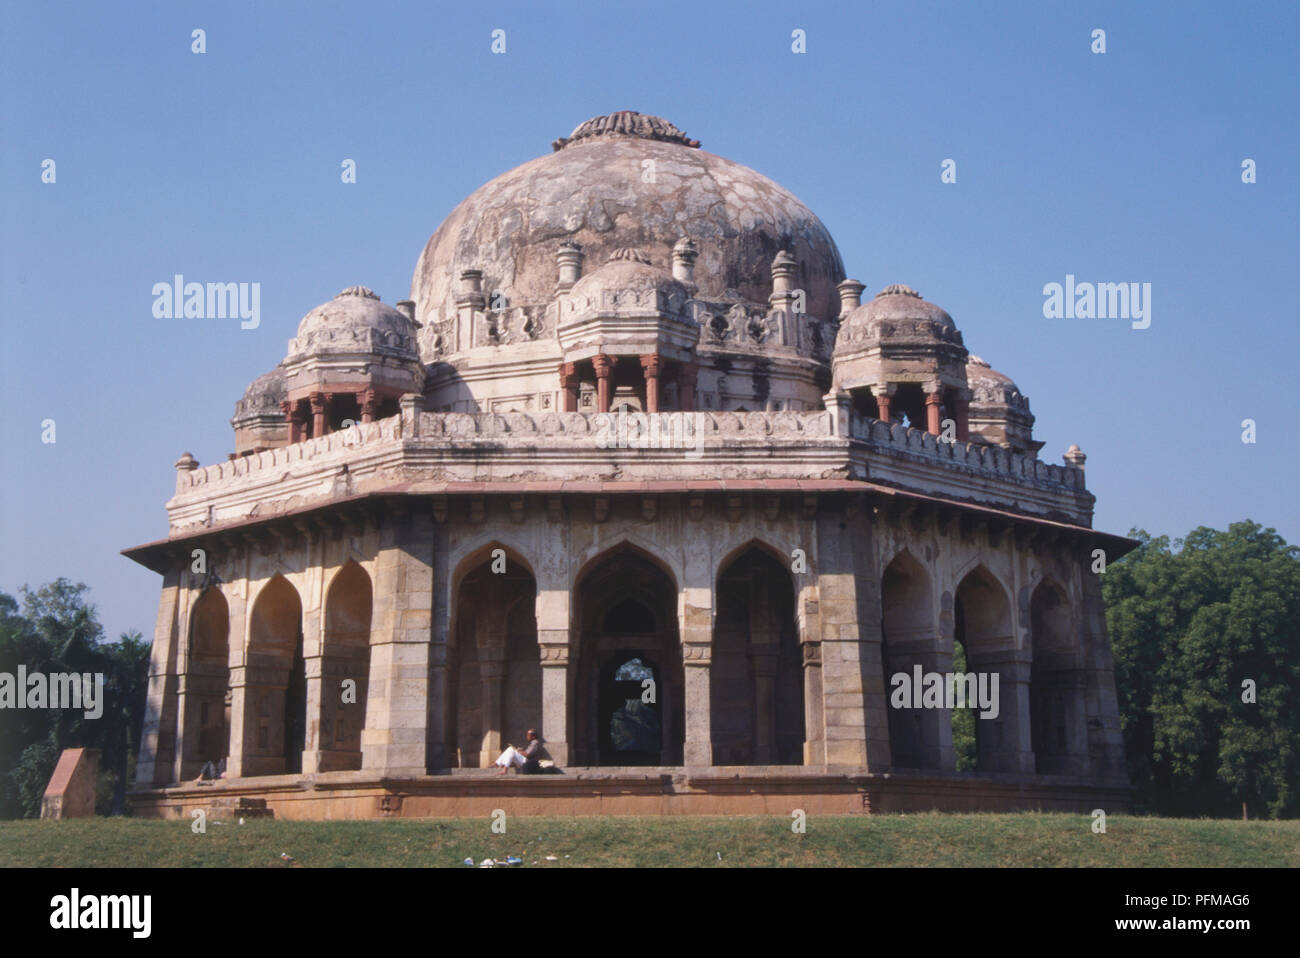 India, New Delhi, Lodi Gardens, ancient tomb of Muhammas Shah, octagonal structure with porticoed sides, dome surrounded by chhatris, jaalis once filled the spaces between the pillars, trees in background. Stock Photo